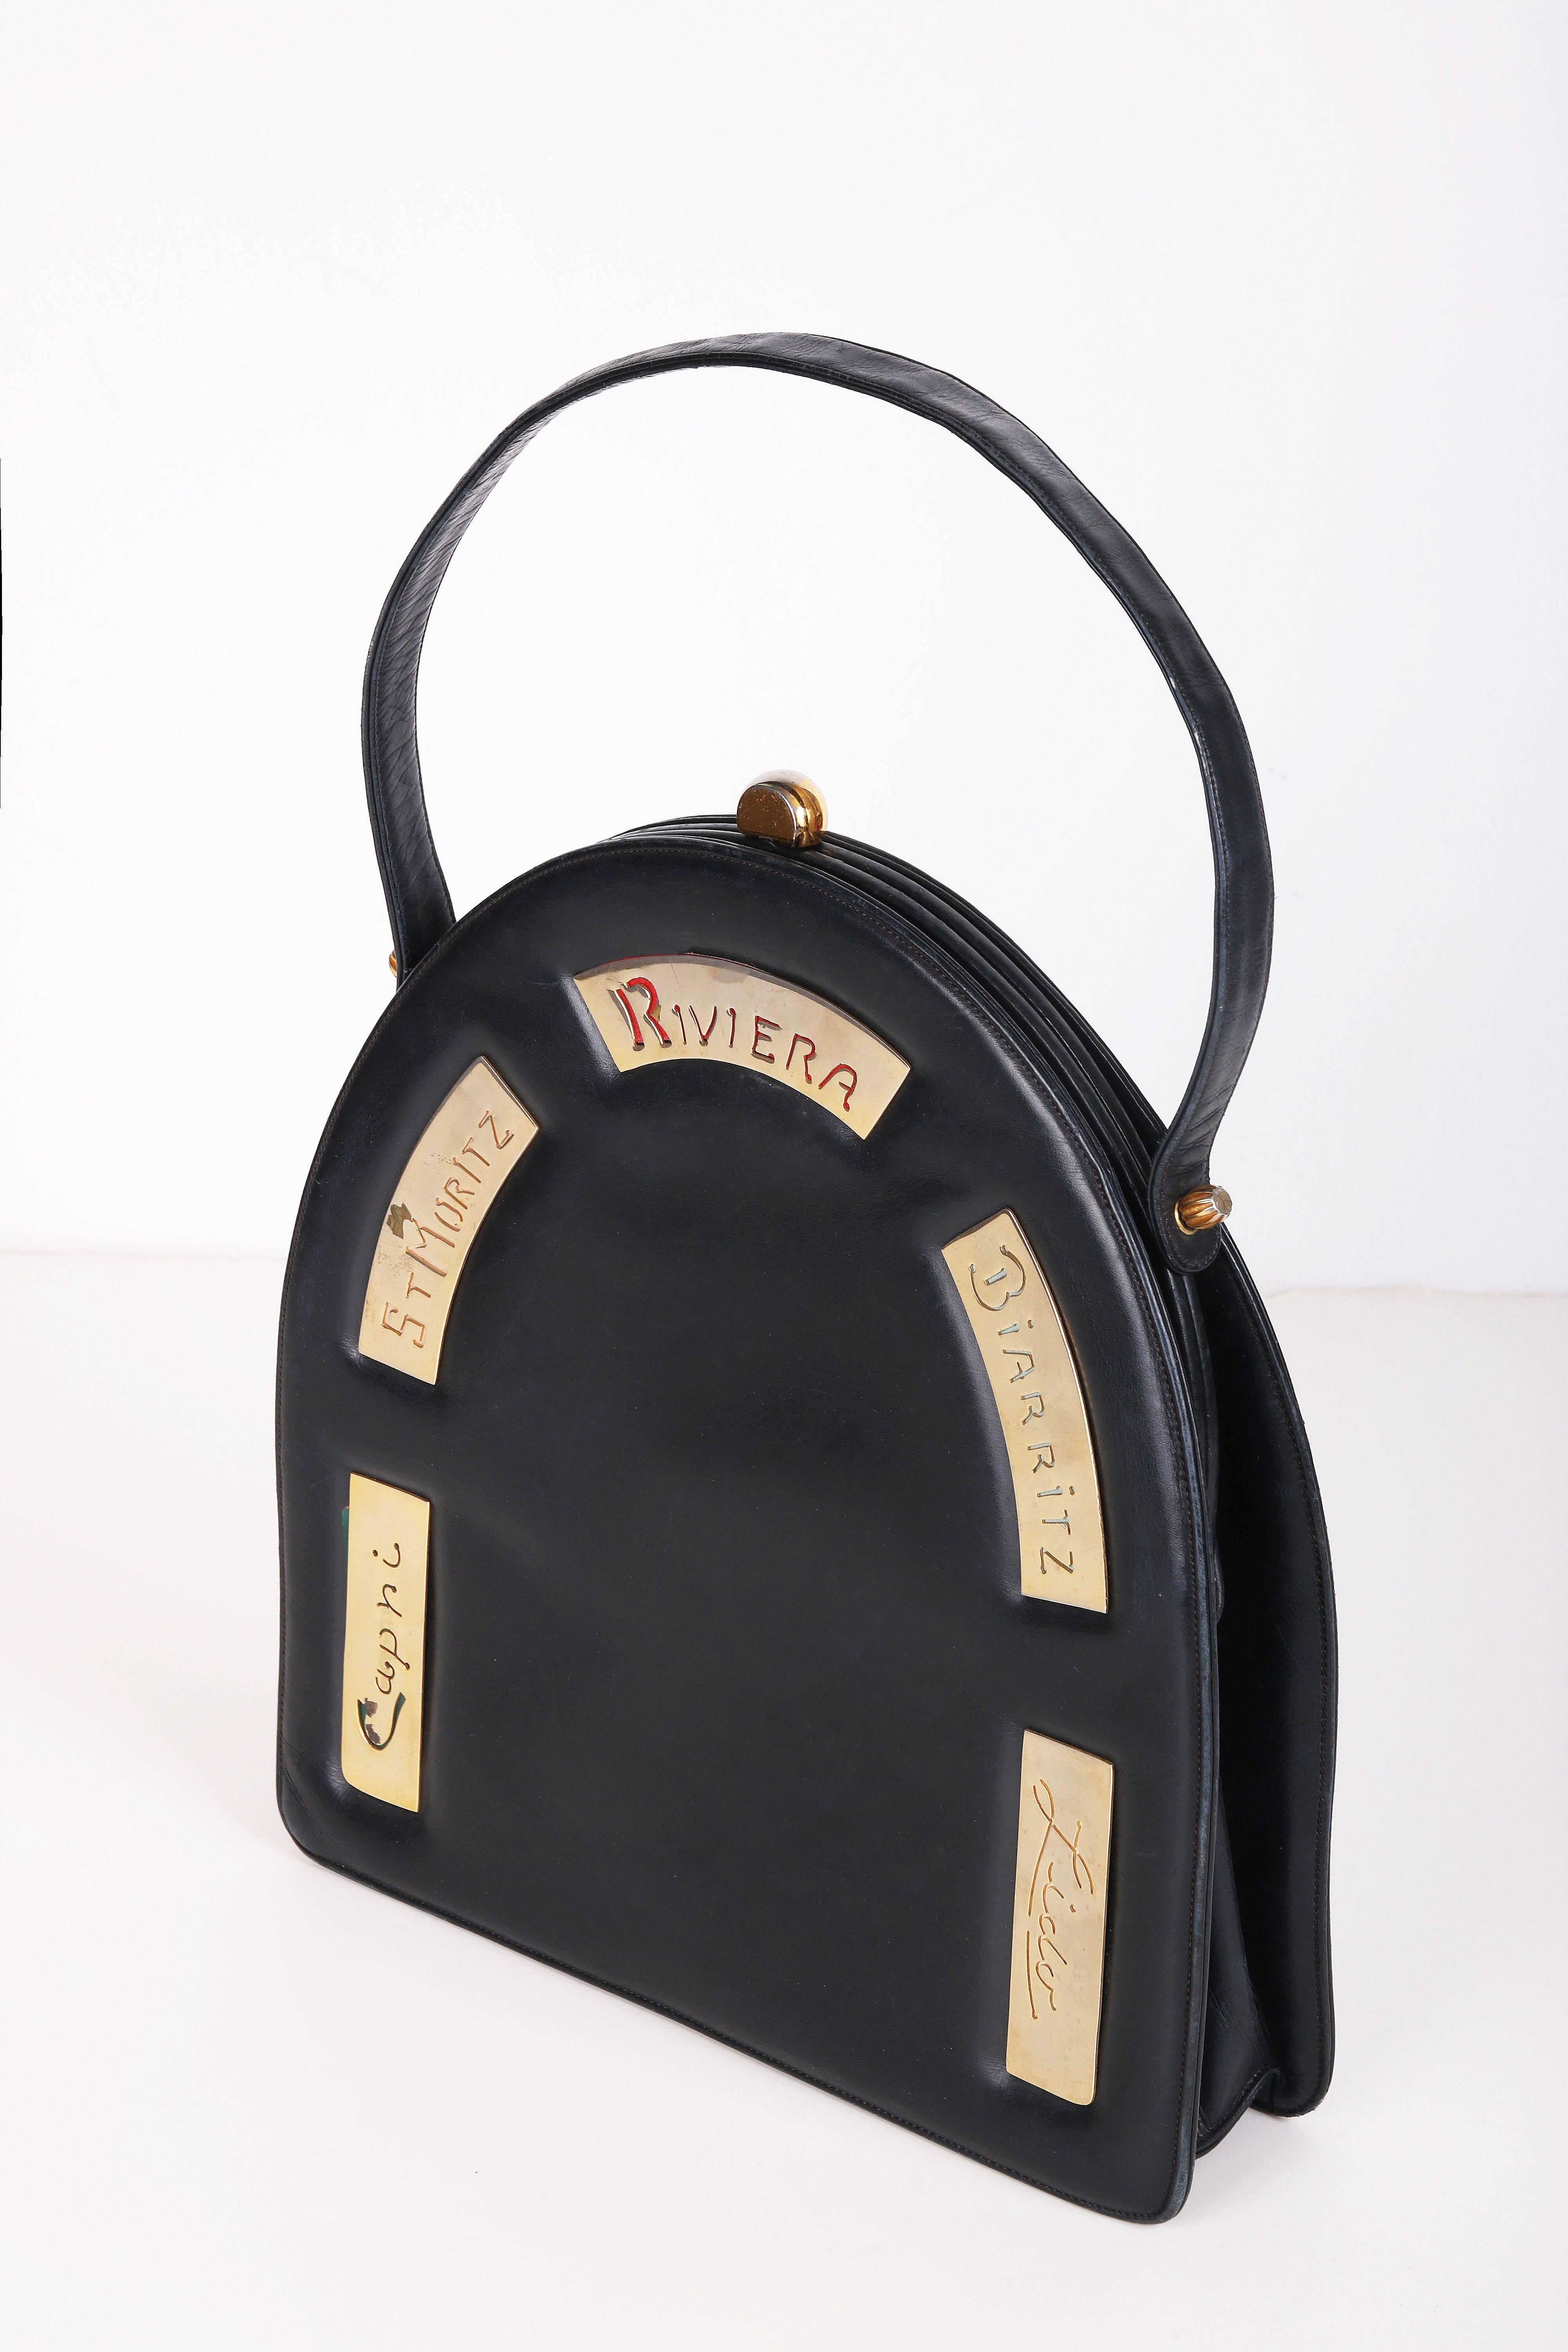 1960's Prestige black leather destination handbag in an arched shape and top handle. This bag features destination cities - Capri, St. Moritz, Riviera, Biarritz, Lido in a variety of colors on gold-toned metal plaques. Metal clasp closure. Lined in